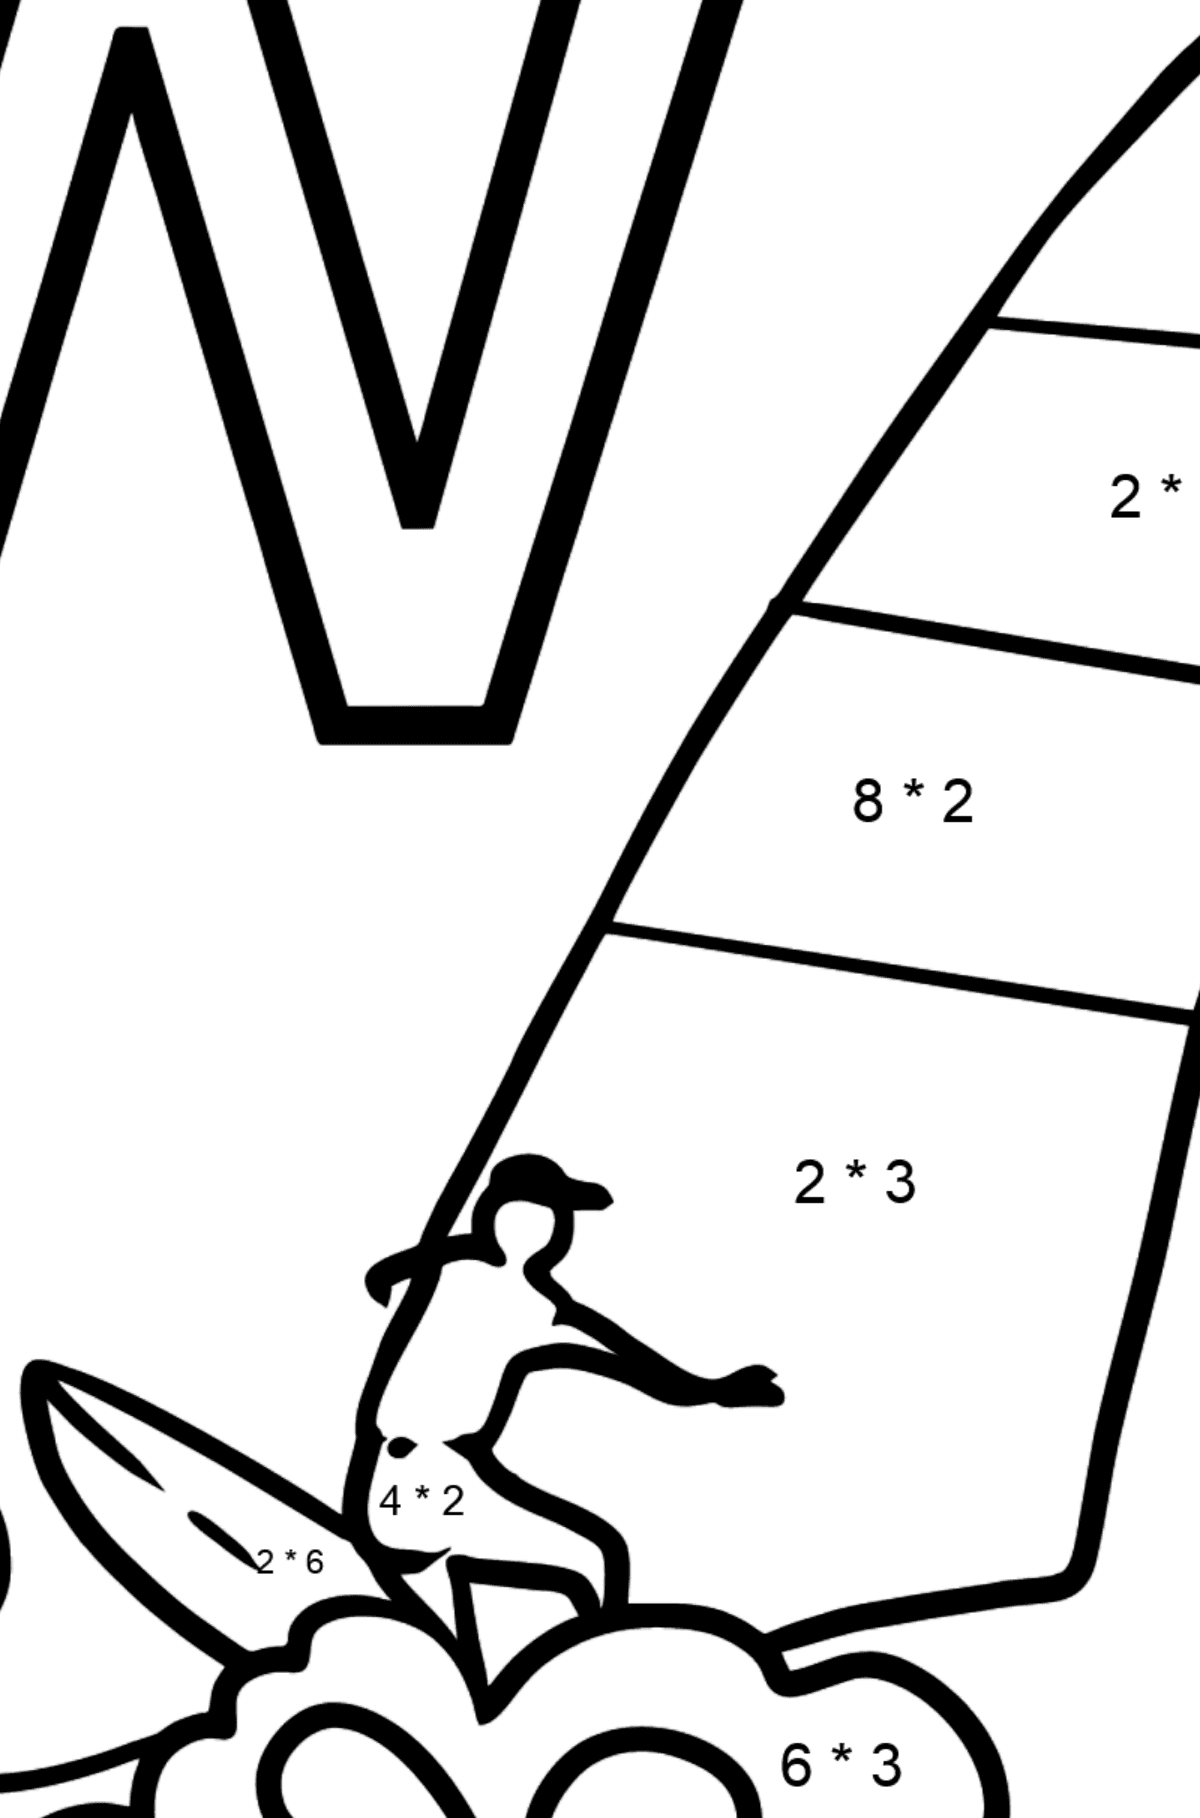 Portuguese Letter W coloring pages - WINDSURF - Math Coloring - Multiplication for Kids